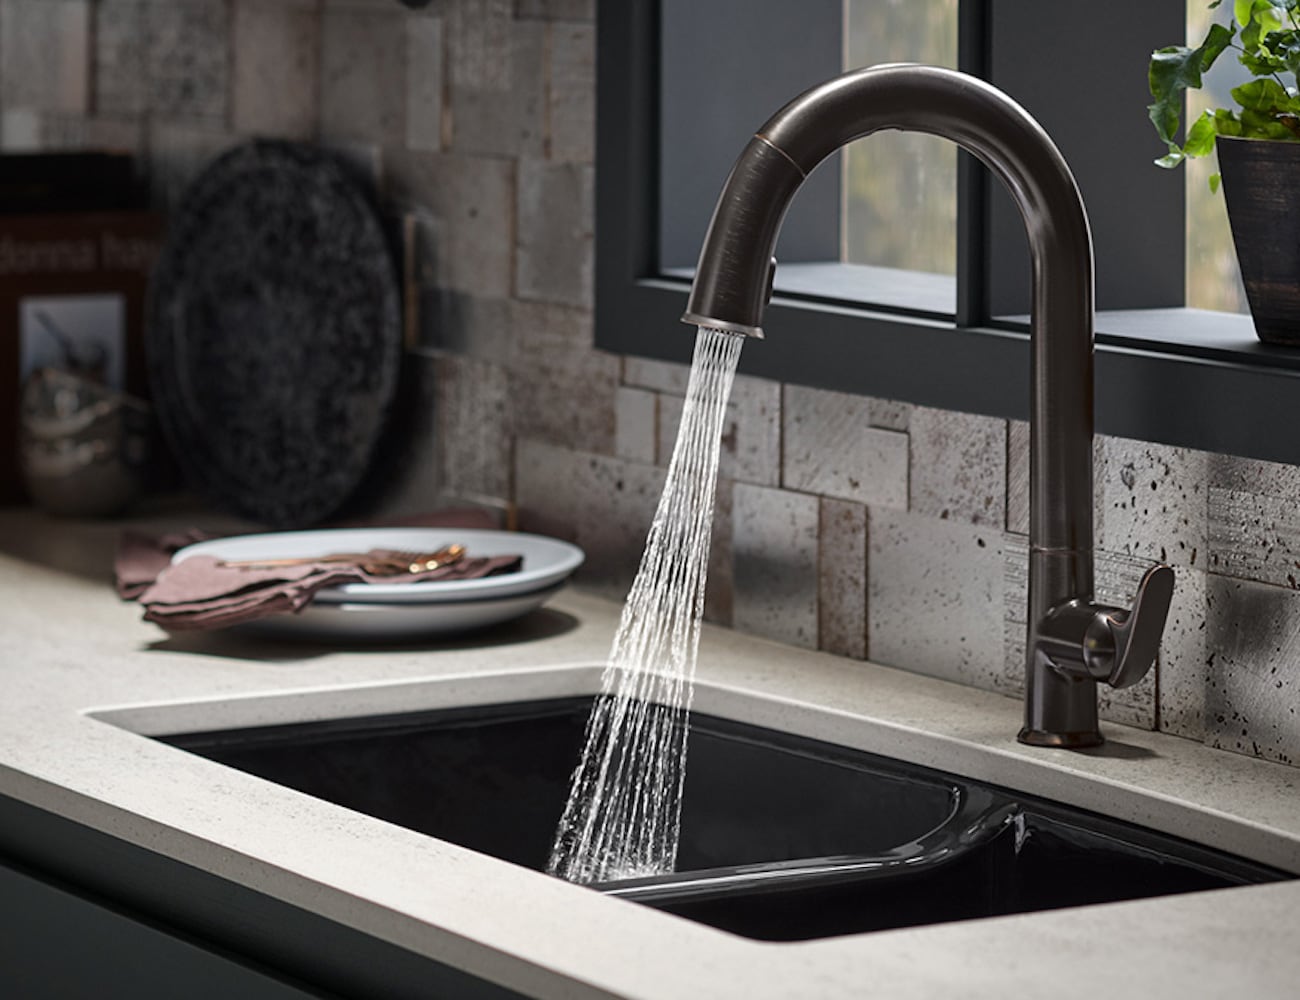 Kohler Konnect Sensate Smart Kitchen Sink Faucet Can Be Activated With Your Voice